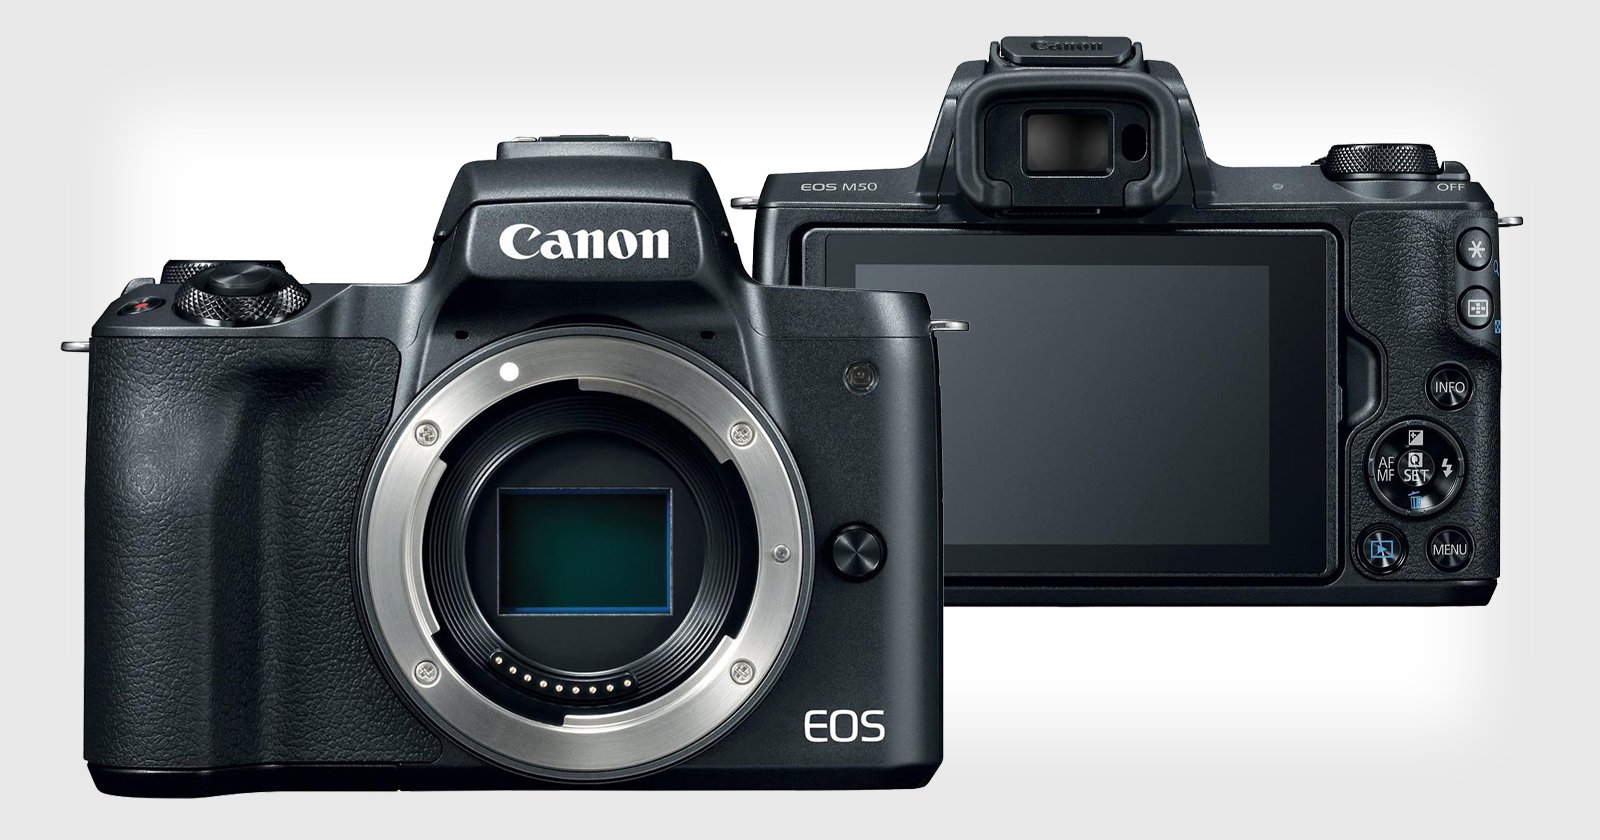 Canon M50 Price Malaysia : Canon EOS M50 Mirrorless Camera With 4K Video Support  - Discover 